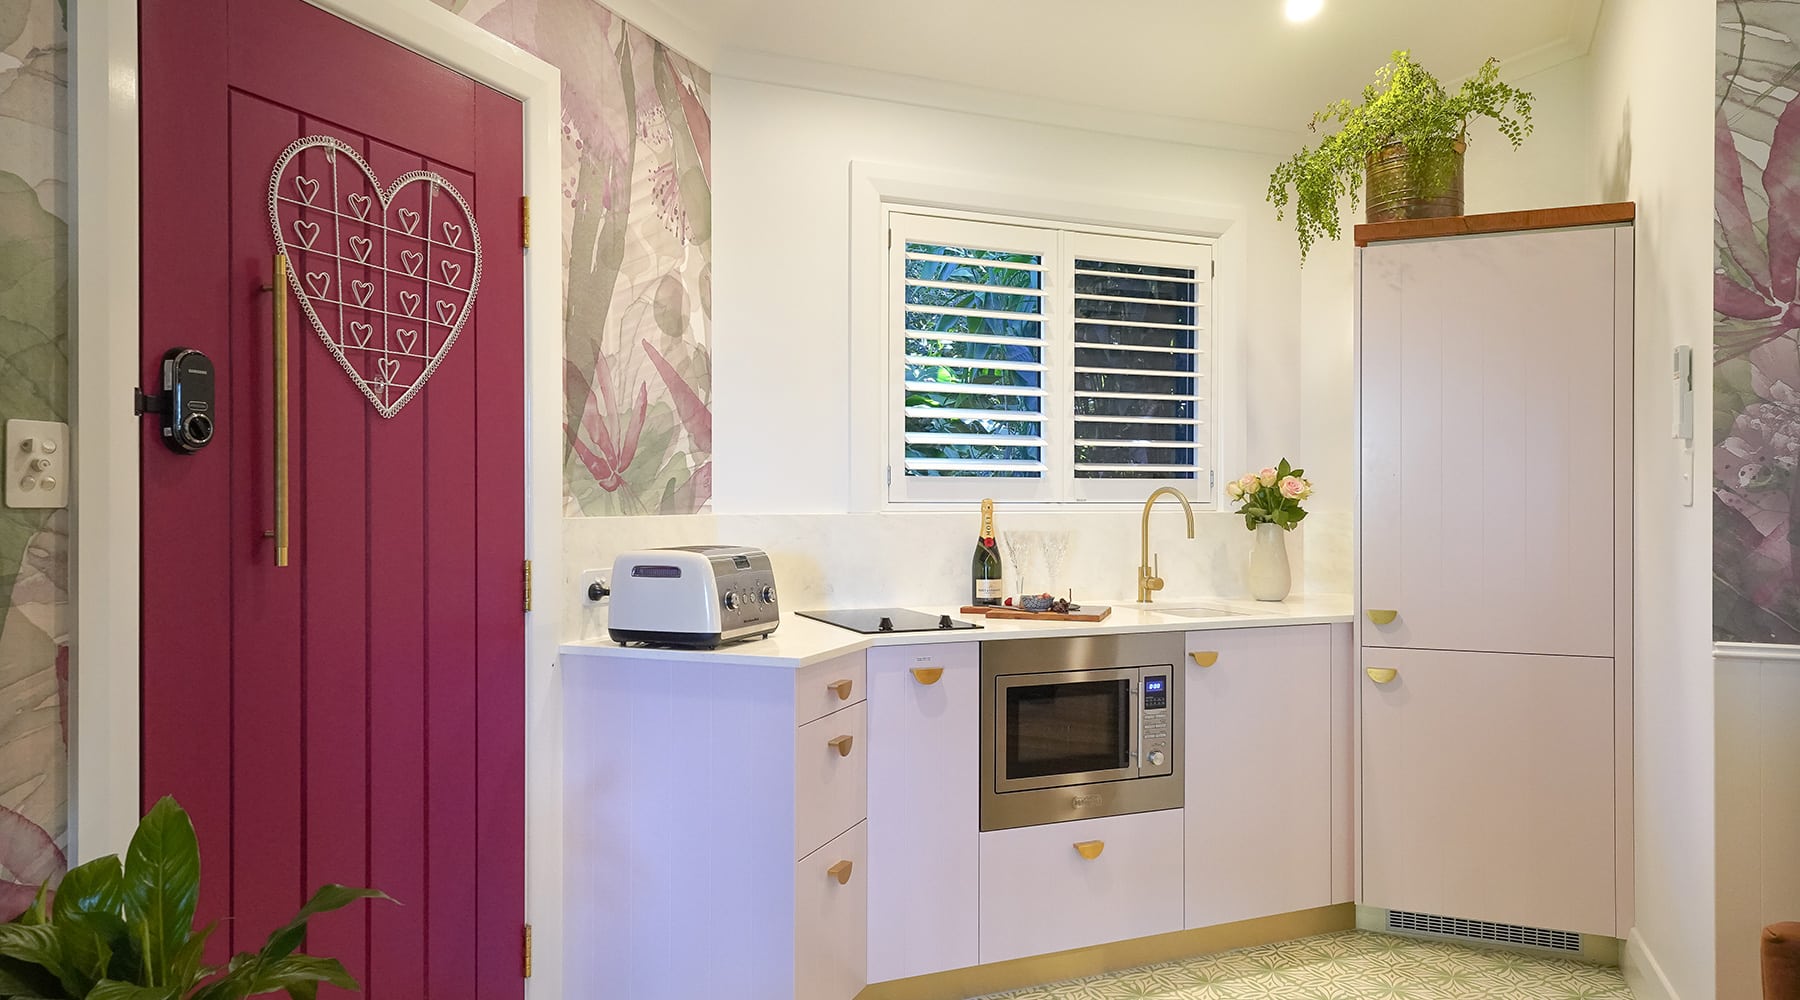 Lovestone Cottages Montville Maple Cottage - Kitchen with all the facilities you need to make a meal or a snack